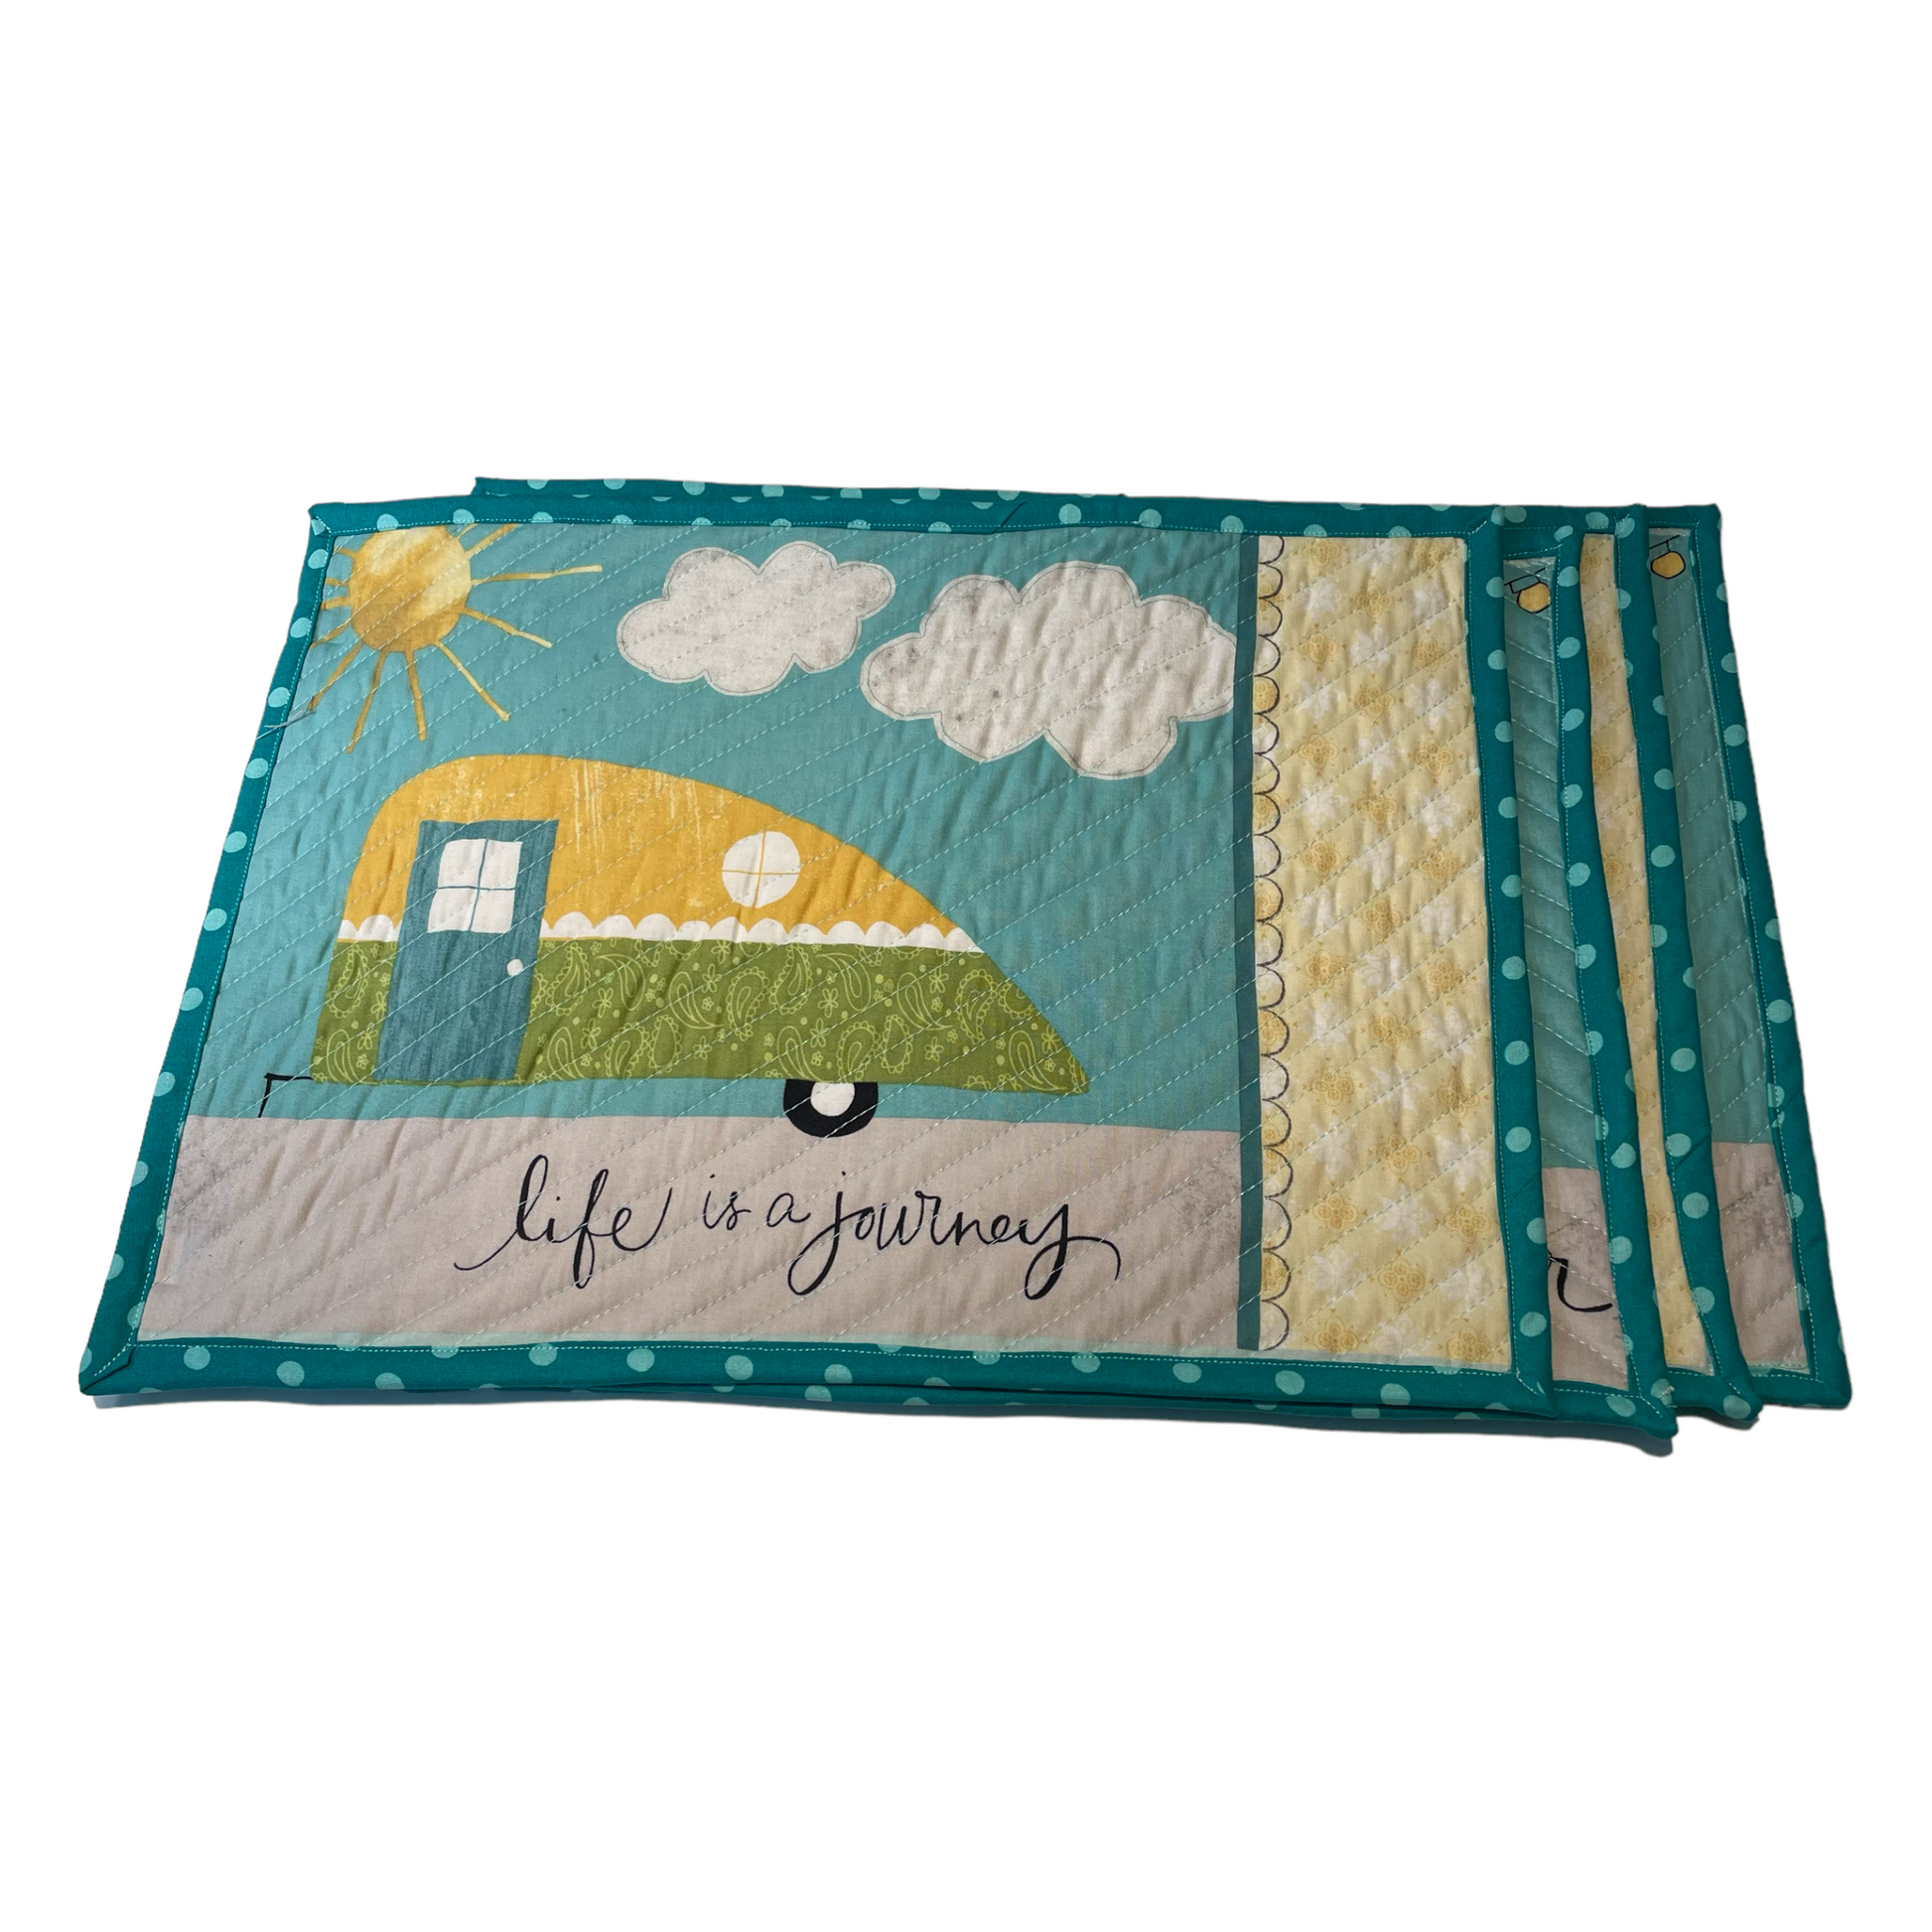 Quilting Camping Placemats - Home Stitchery Decor